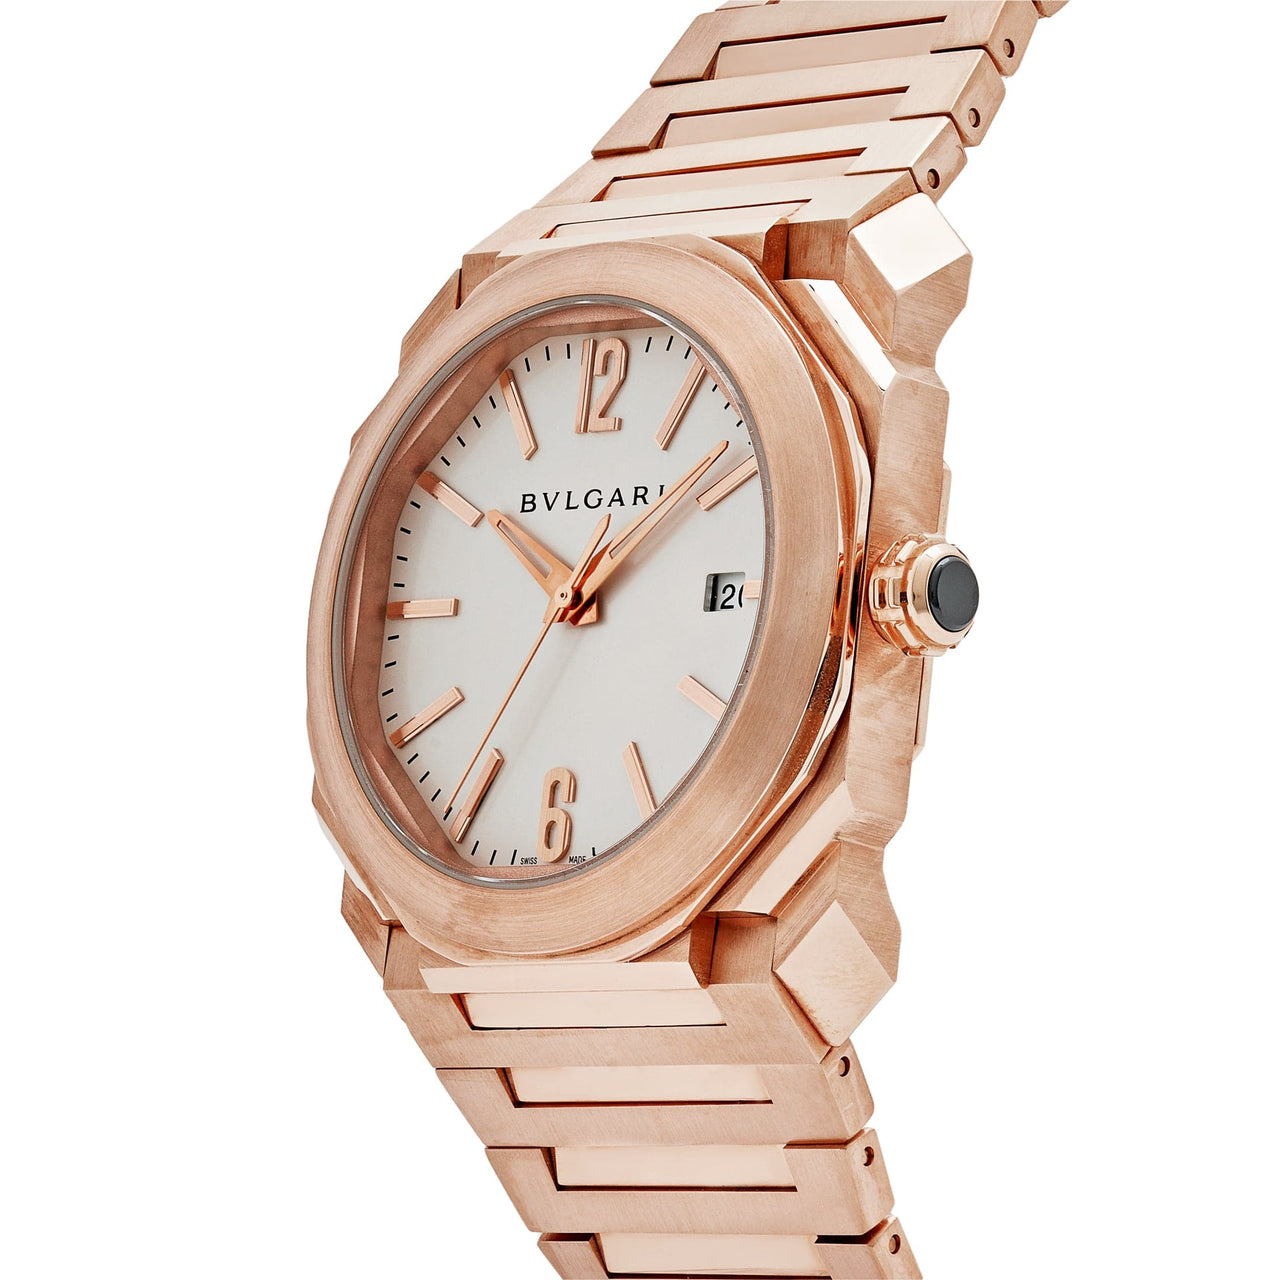 BVLGARI Octo Automatic 102318 Rose Gold Silver Dial